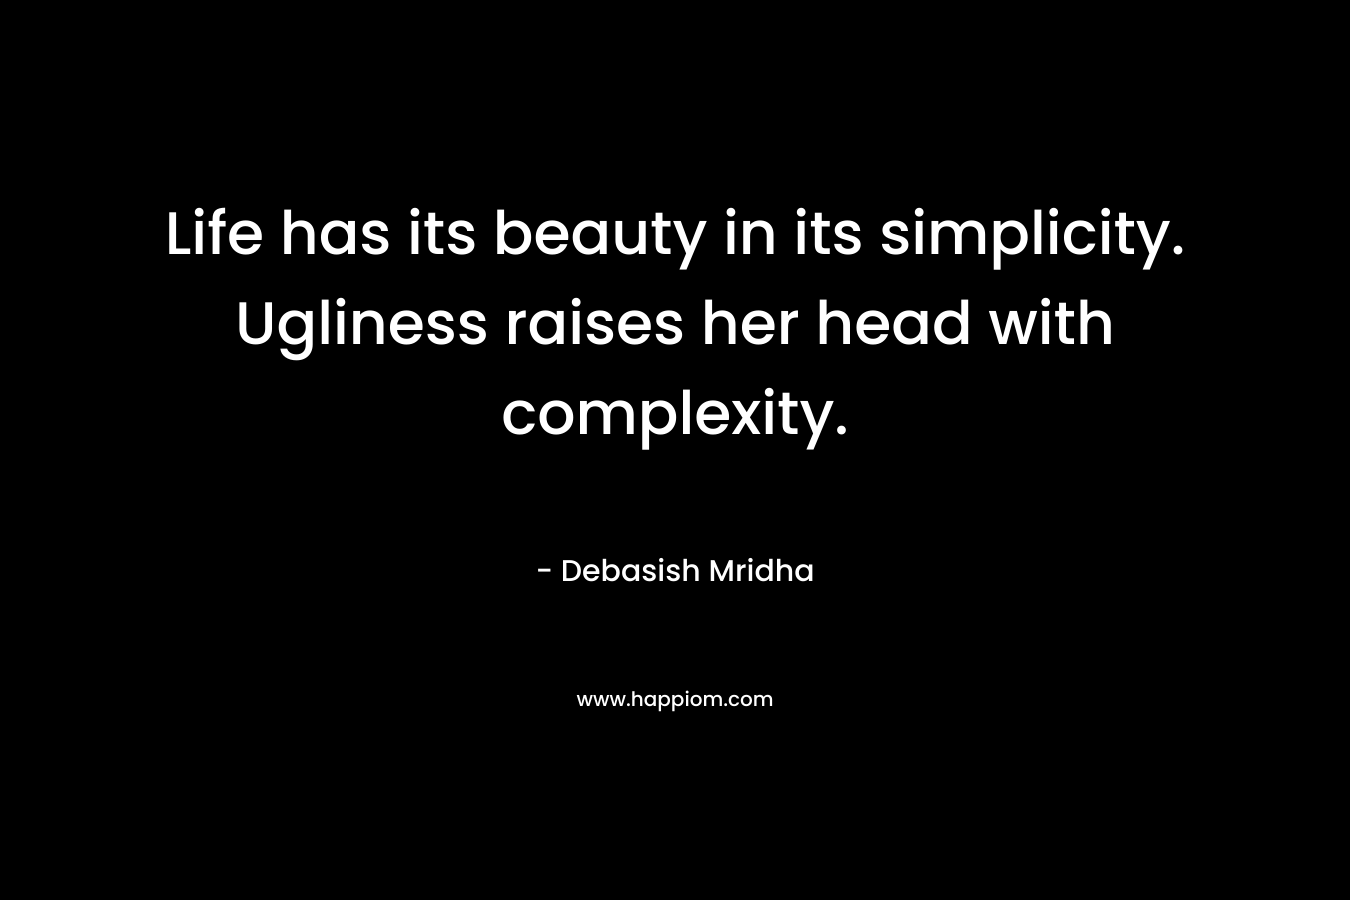 Life has its beauty in its simplicity. Ugliness raises her head with complexity. – Debasish Mridha